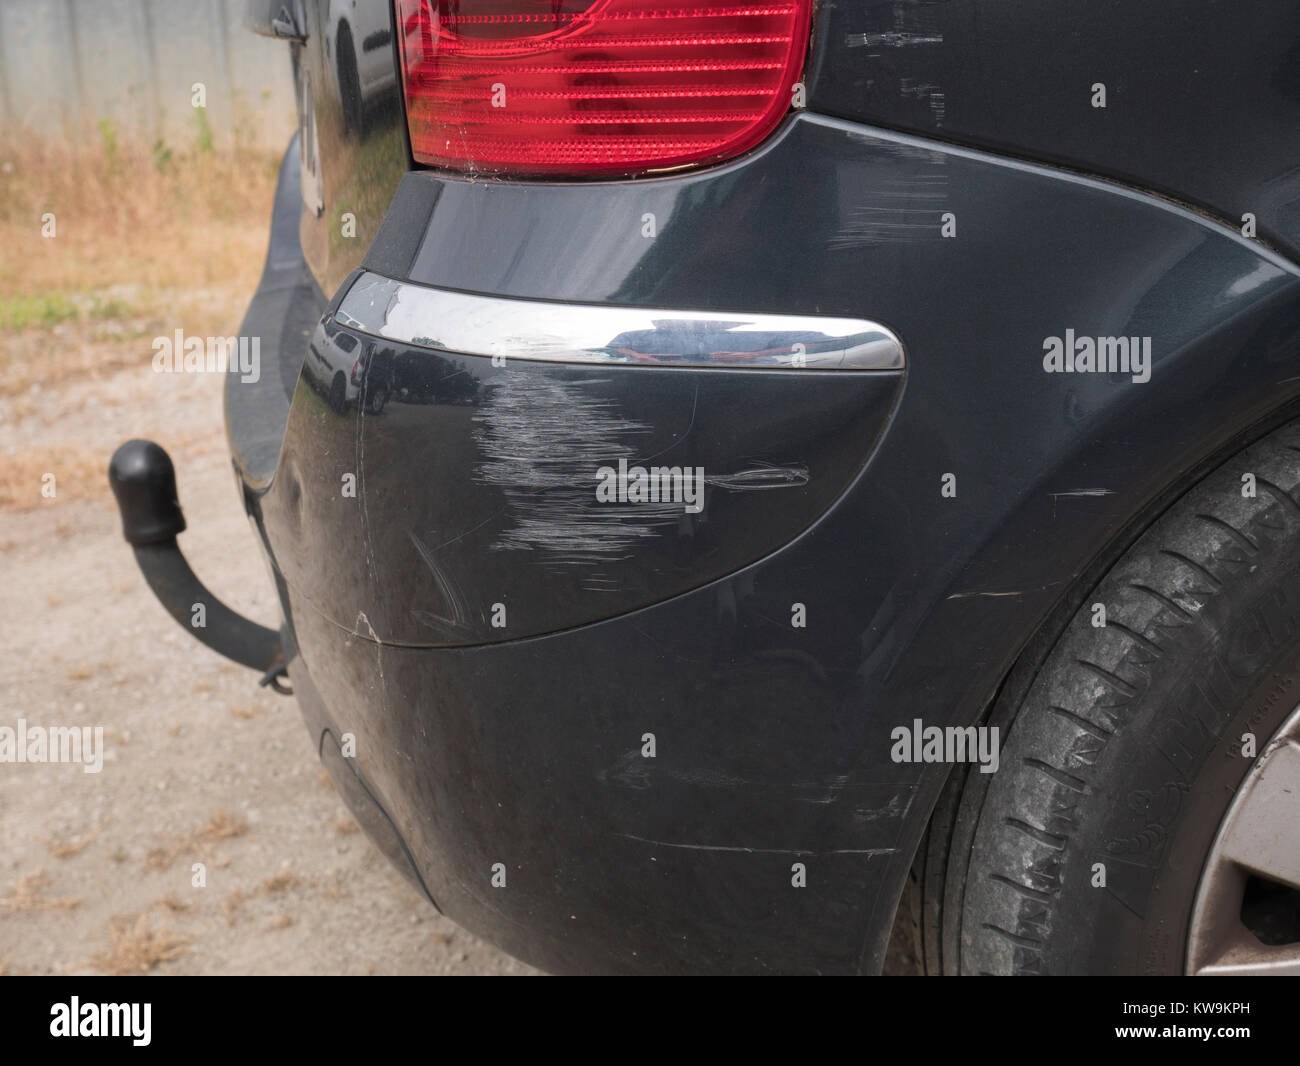 Scratches on the rear wing of a black car Stock Photo